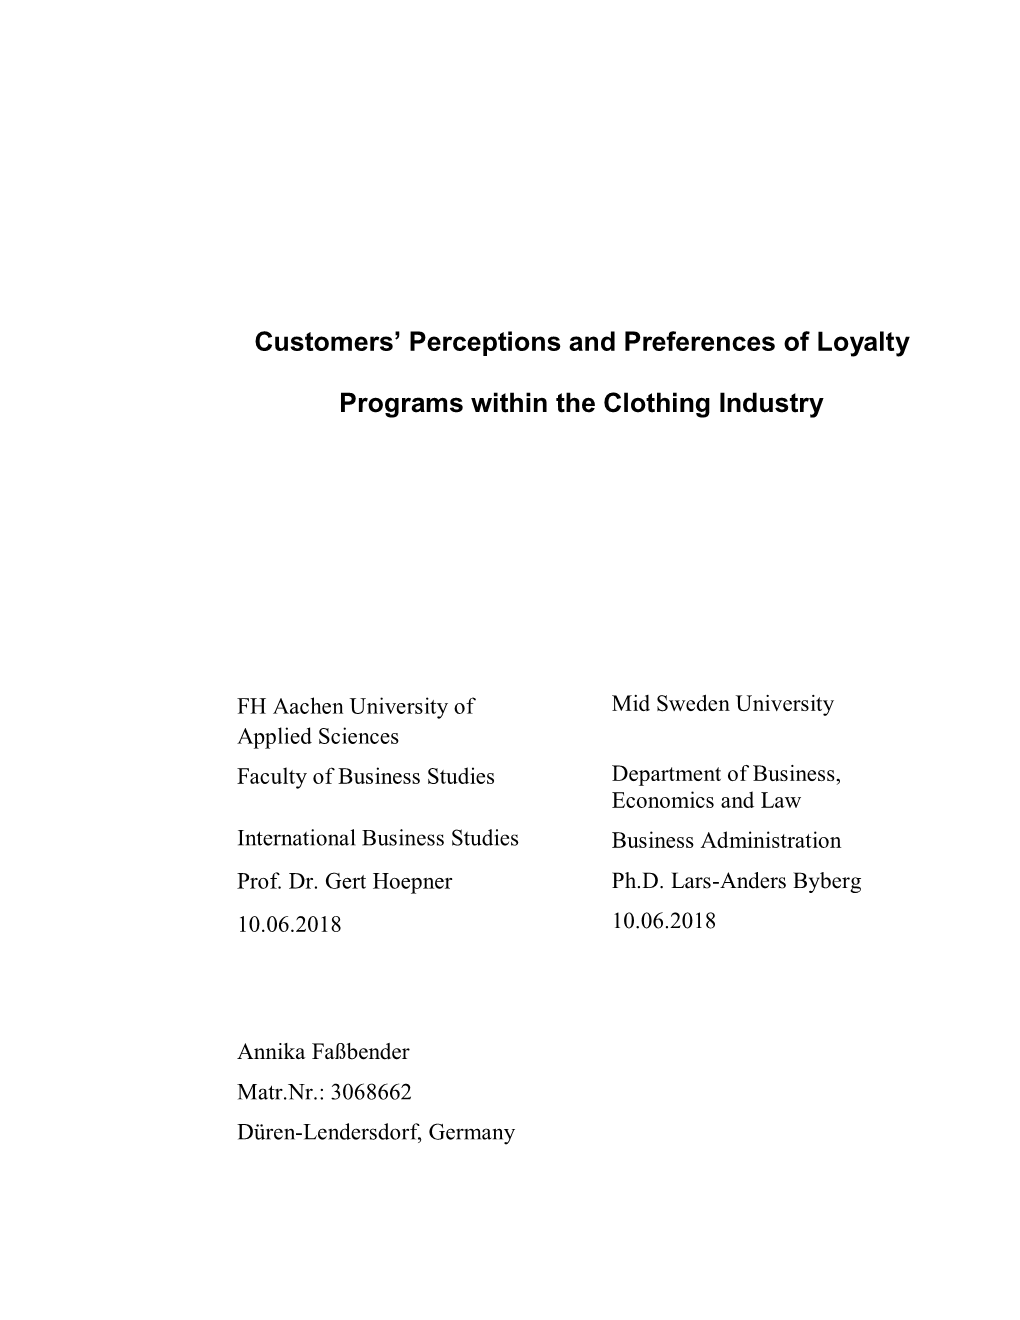 Customers' Perceptions and Preferences of Loyalty Programs